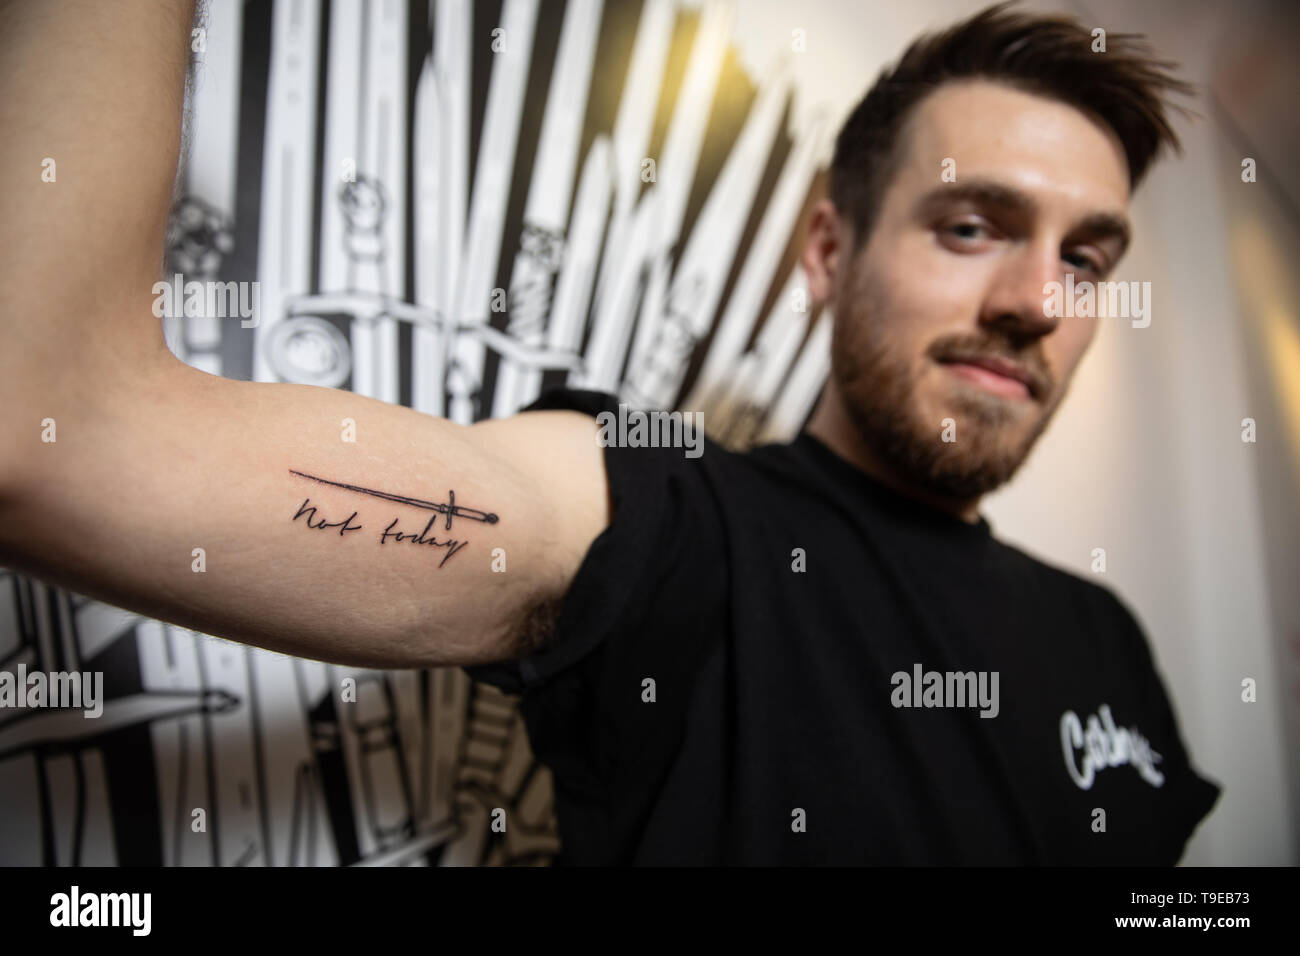 First superfans to get their FREE tattoos at the NOW TV GoT INK tattoo  studio to mark the start of Season 8 Featuring: Atmosphere Where: London,  United Kingdom When: 16 Apr 2019